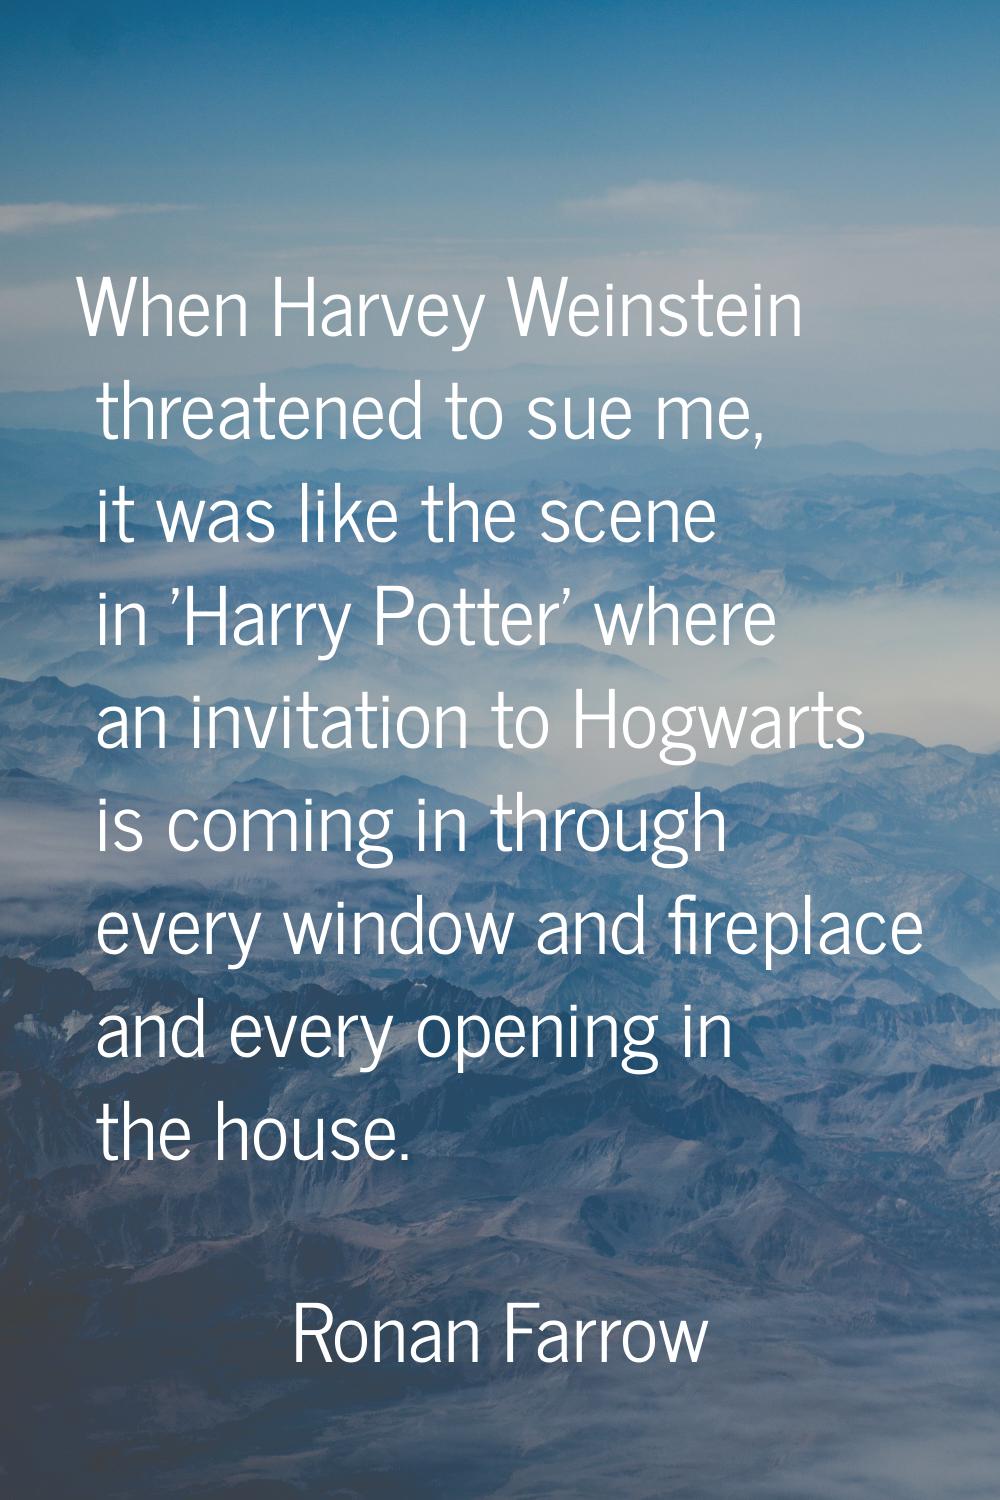 When Harvey Weinstein threatened to sue me, it was like the scene in 'Harry Potter' where an invita